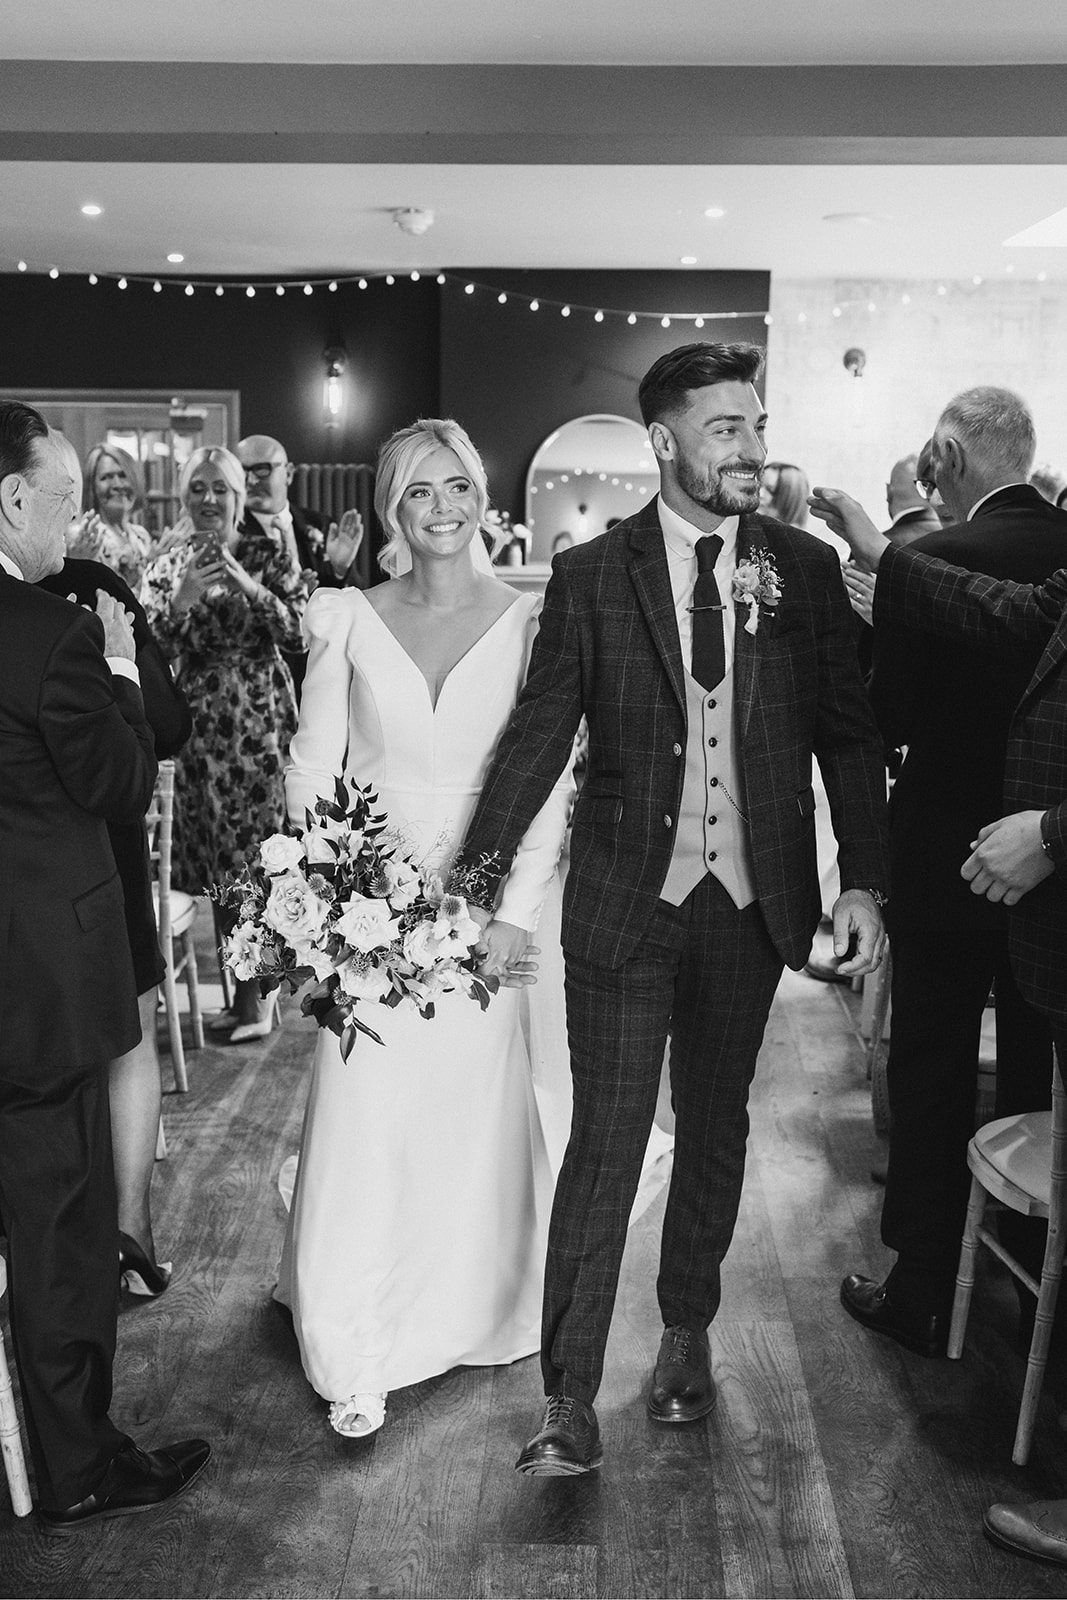 The Chequers Inn Wedding Photography - the bride and groom walking down the aisle as a newly married couple